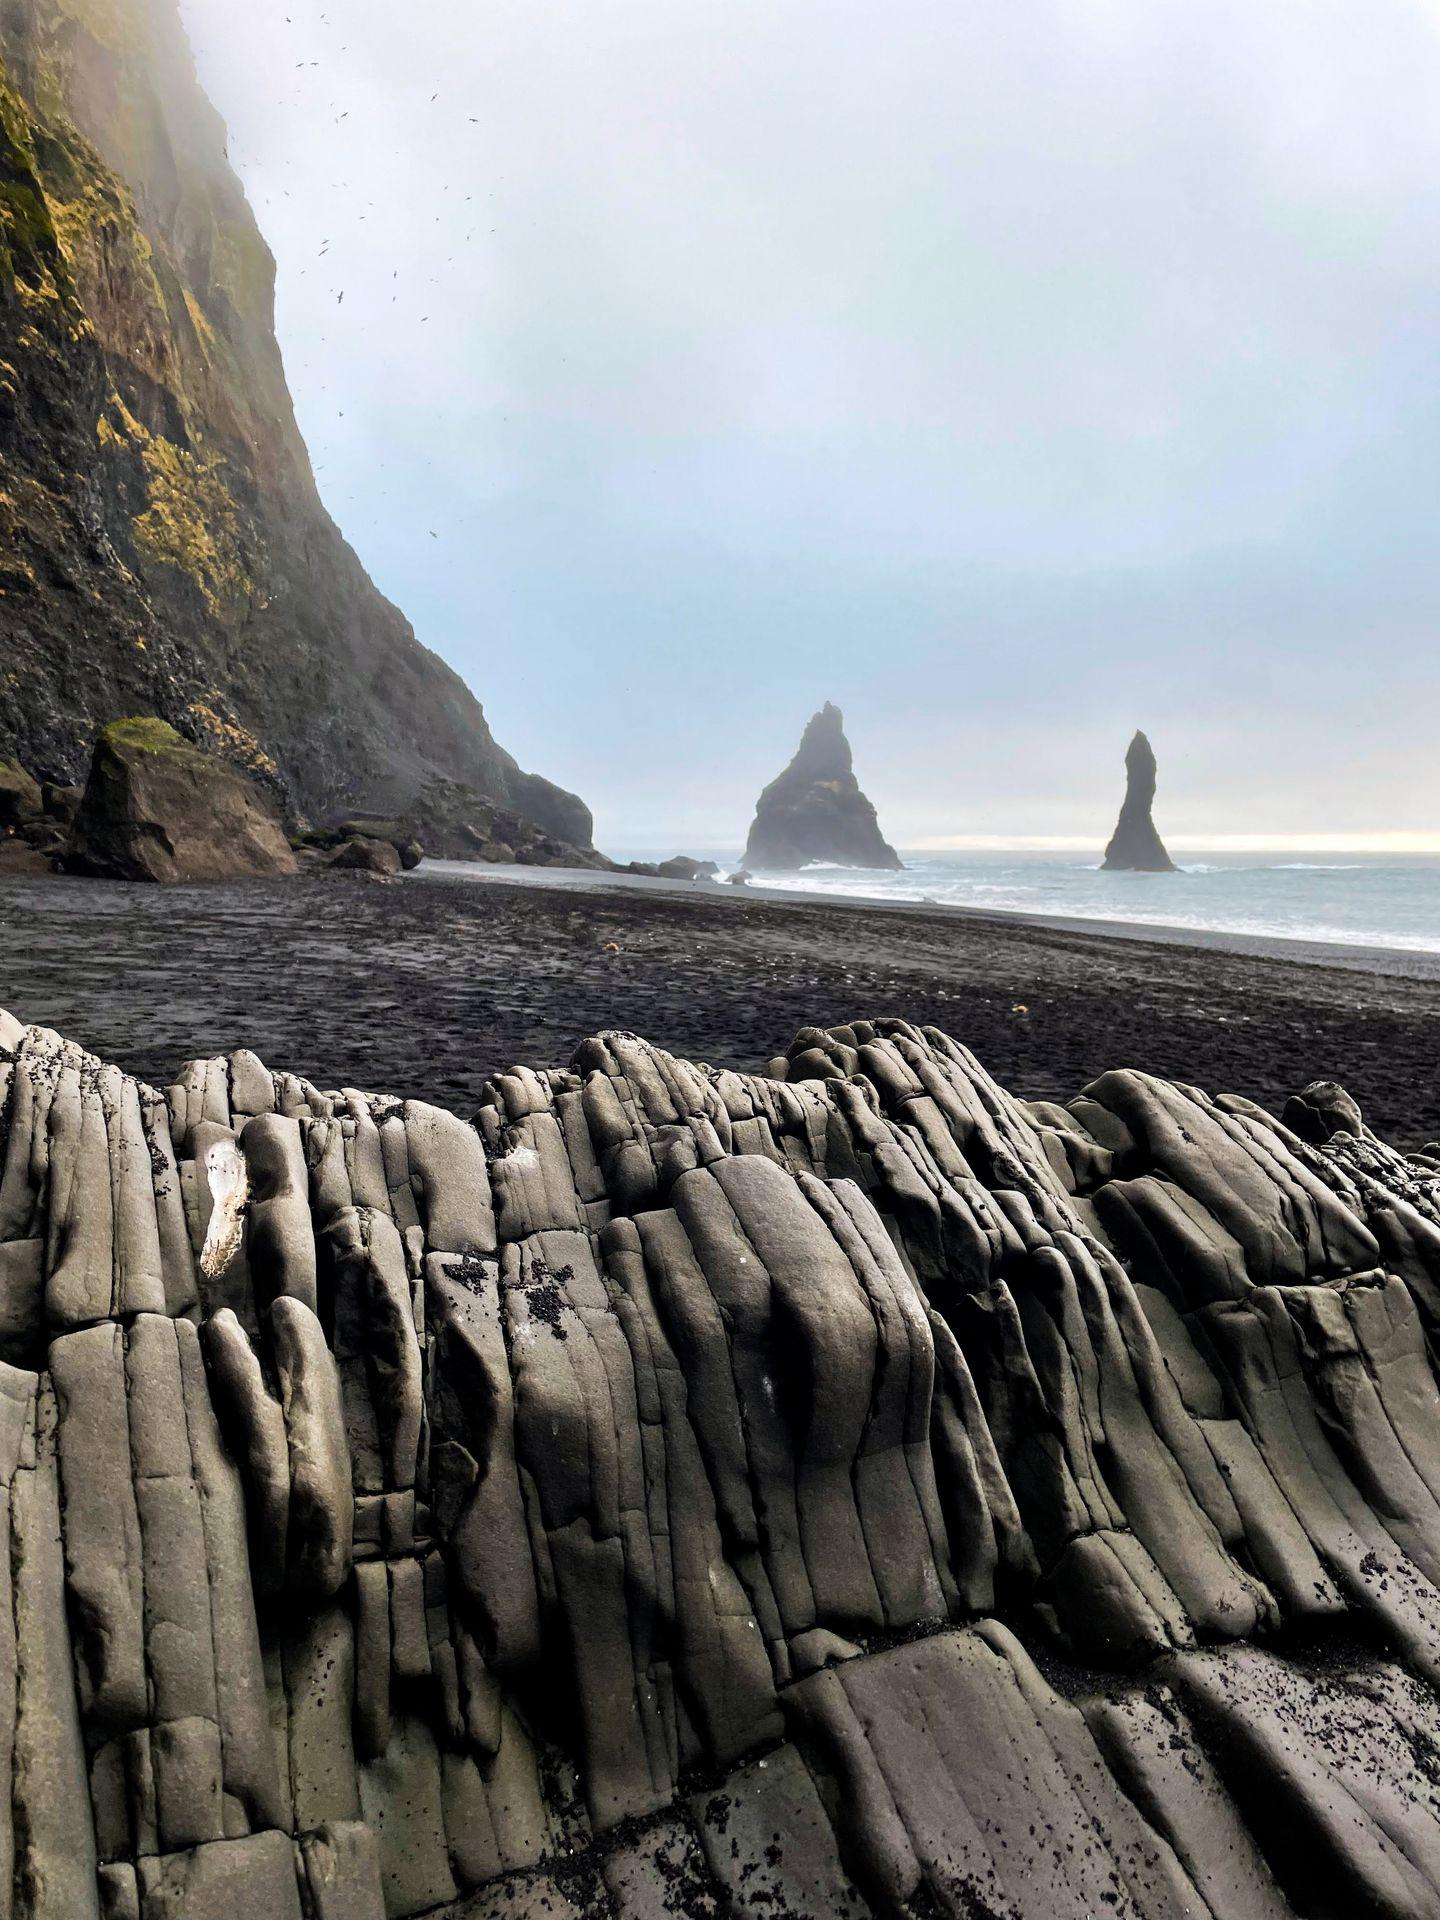 Textured rocks with a black sand beach behind them. There are two large, triangle-shaped rock rising out of the water in the distance.